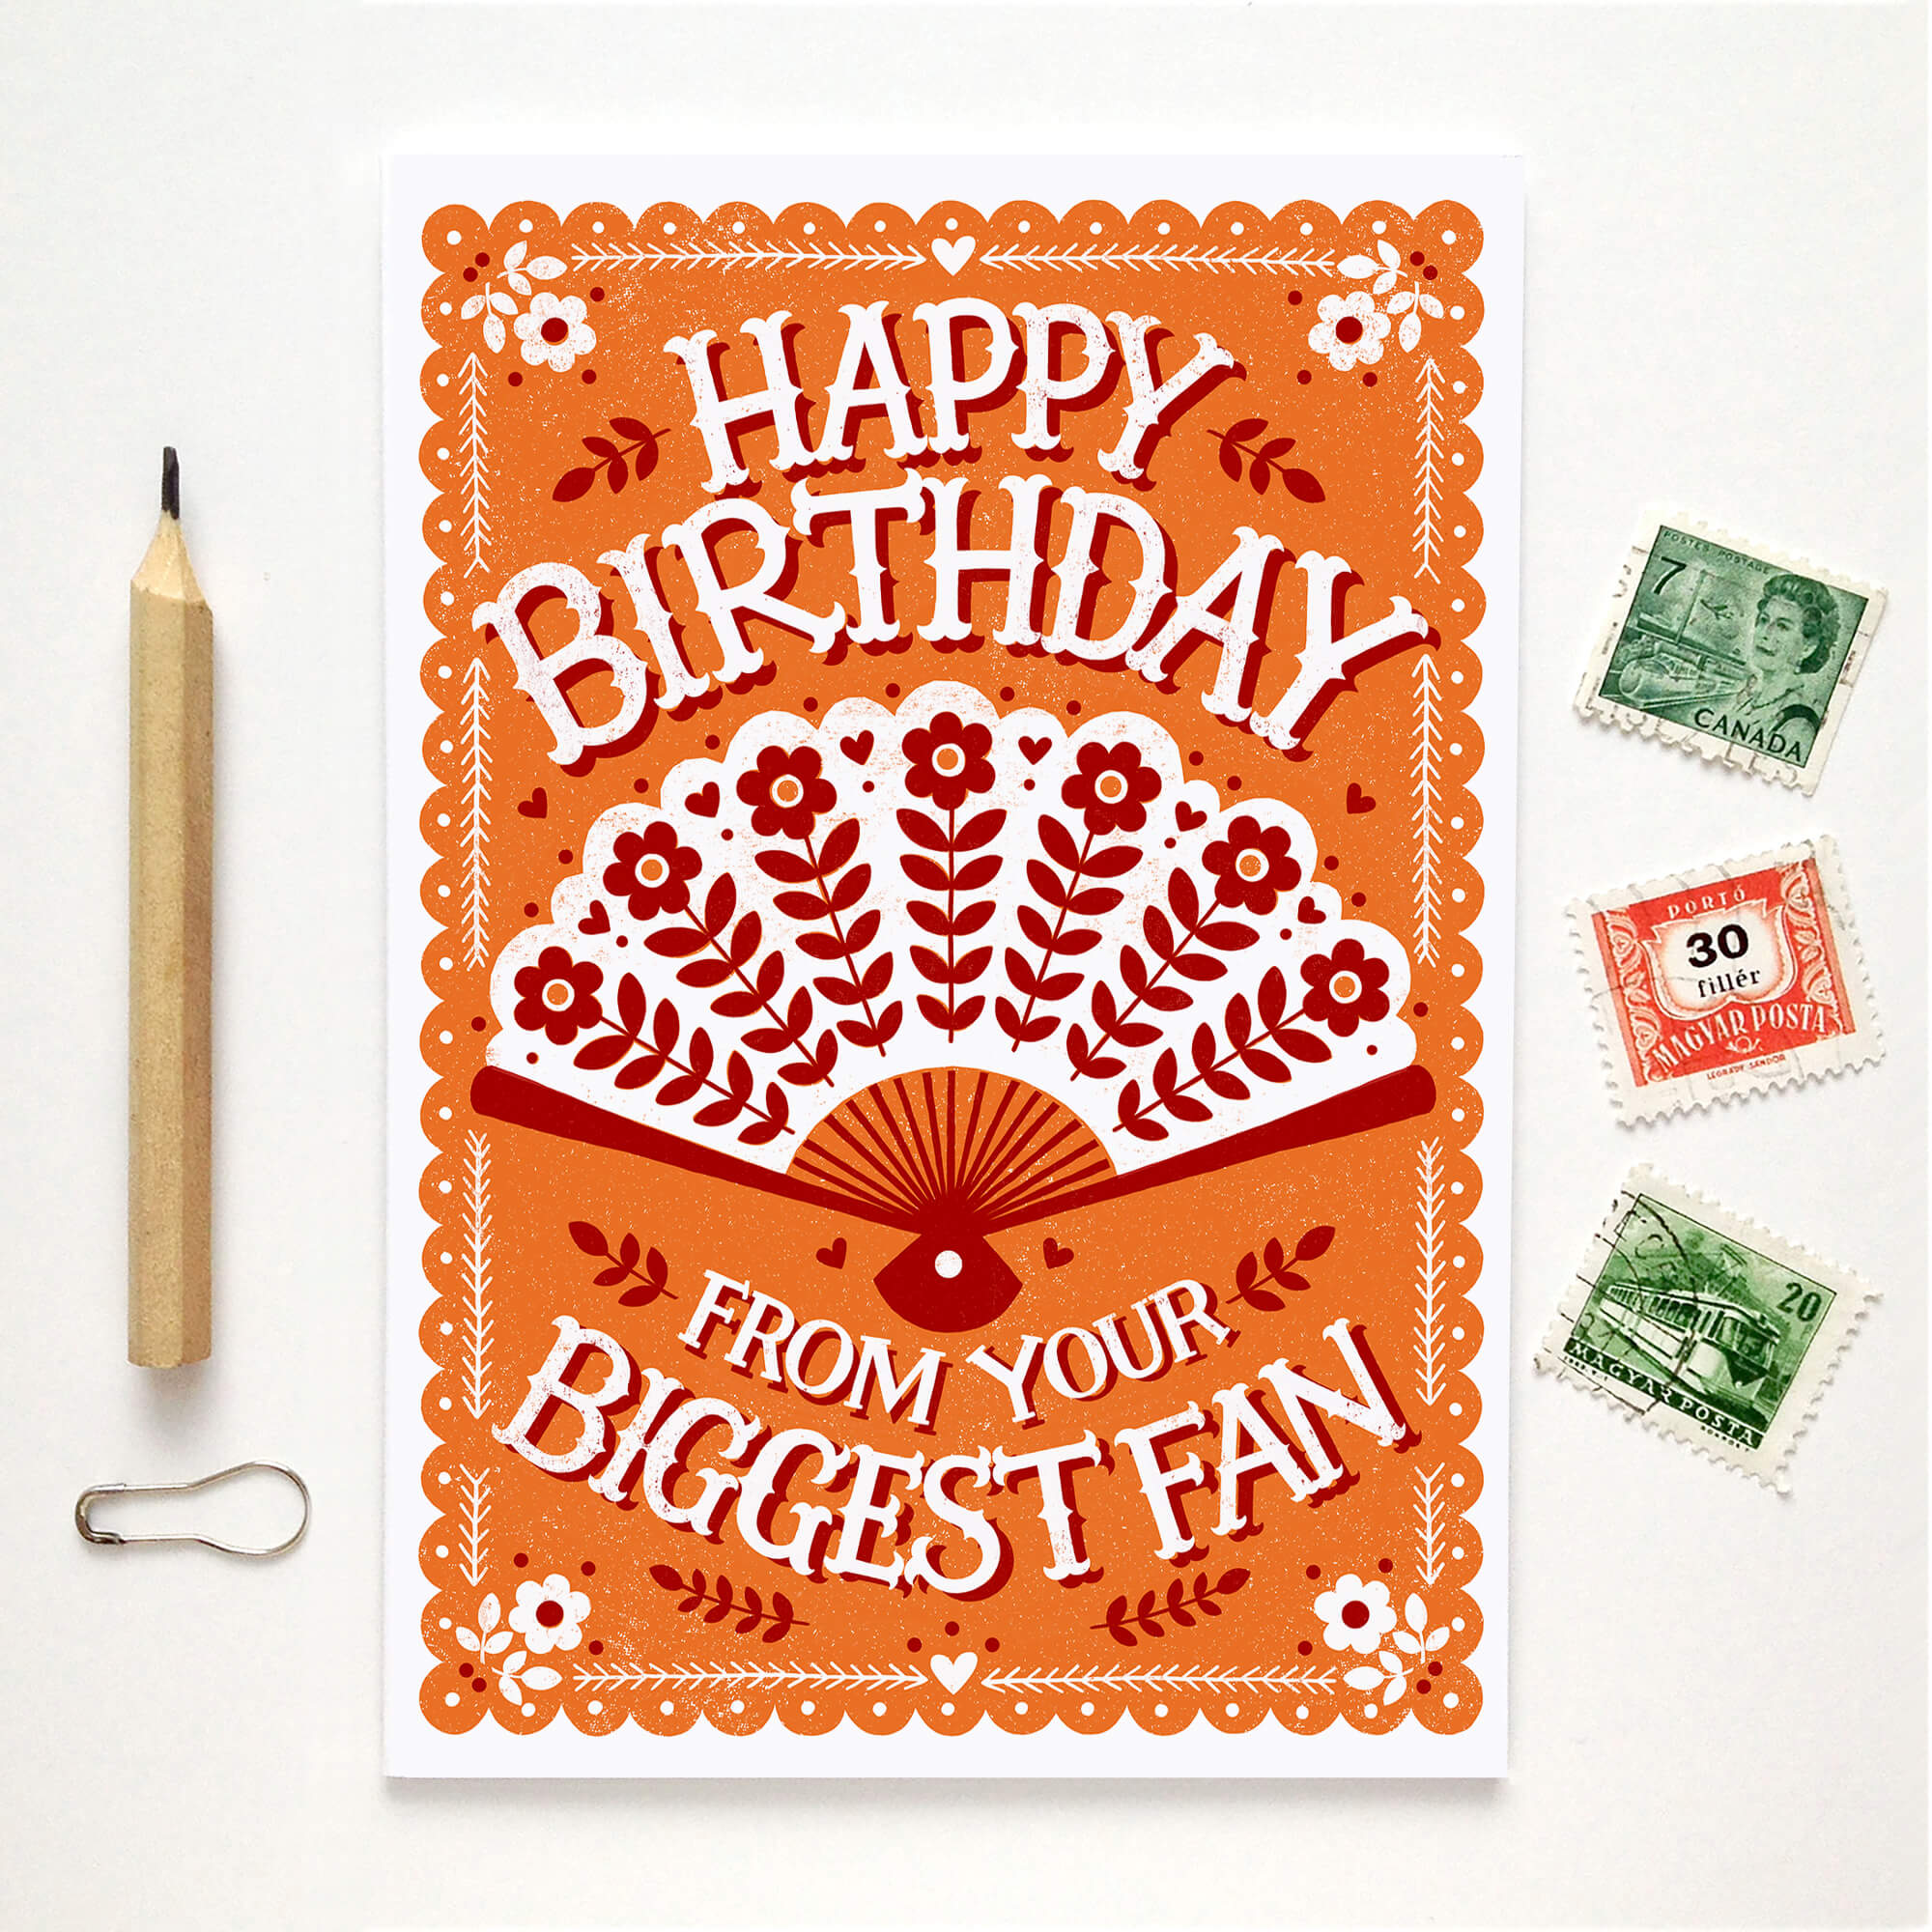 'Biggest Fan' Birthday Greetings Card Front